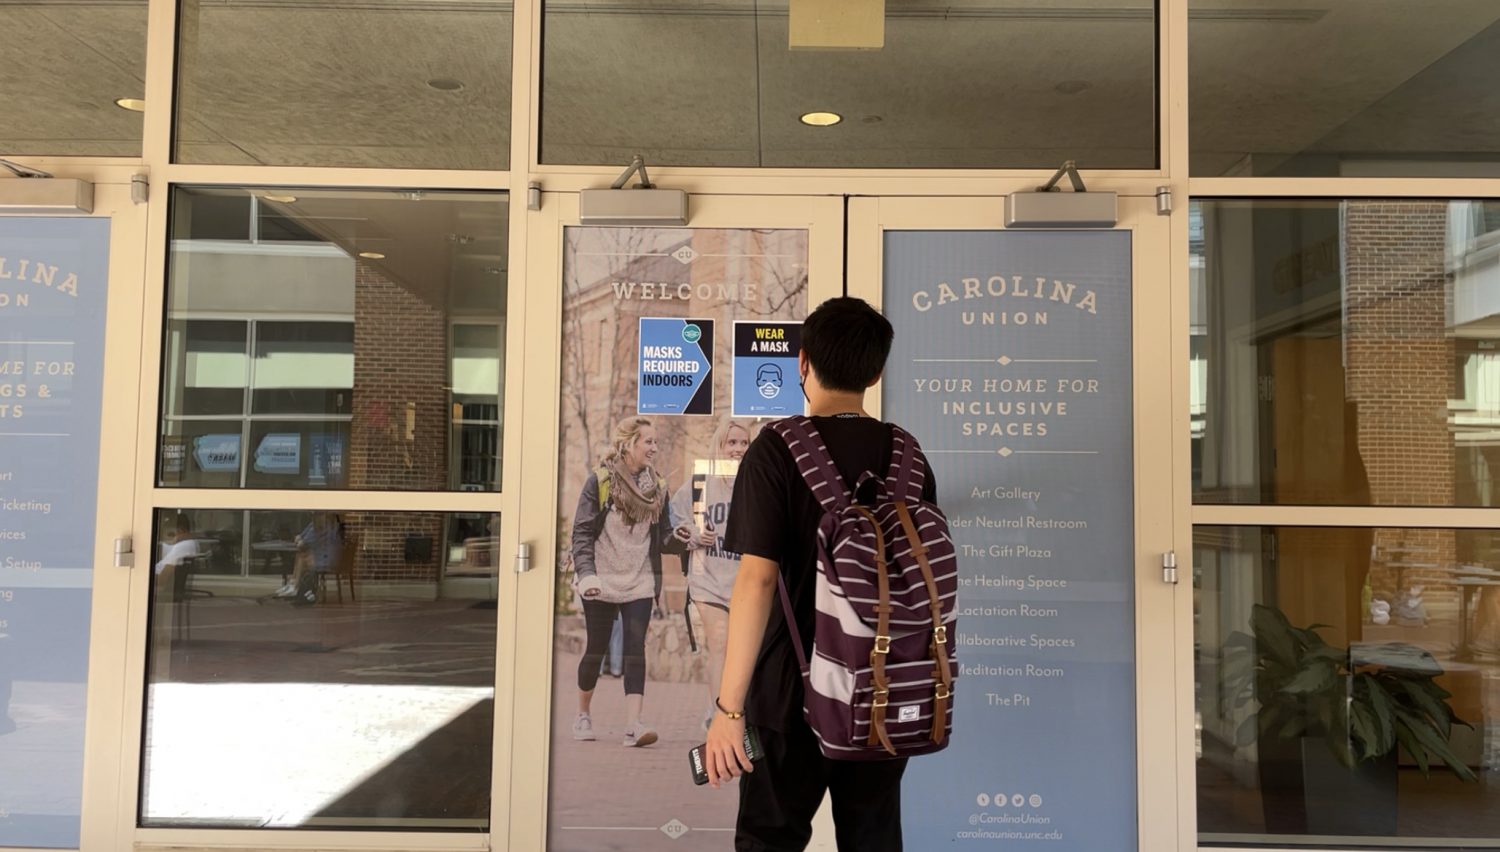 Image of Jerry Xu walking in campus building